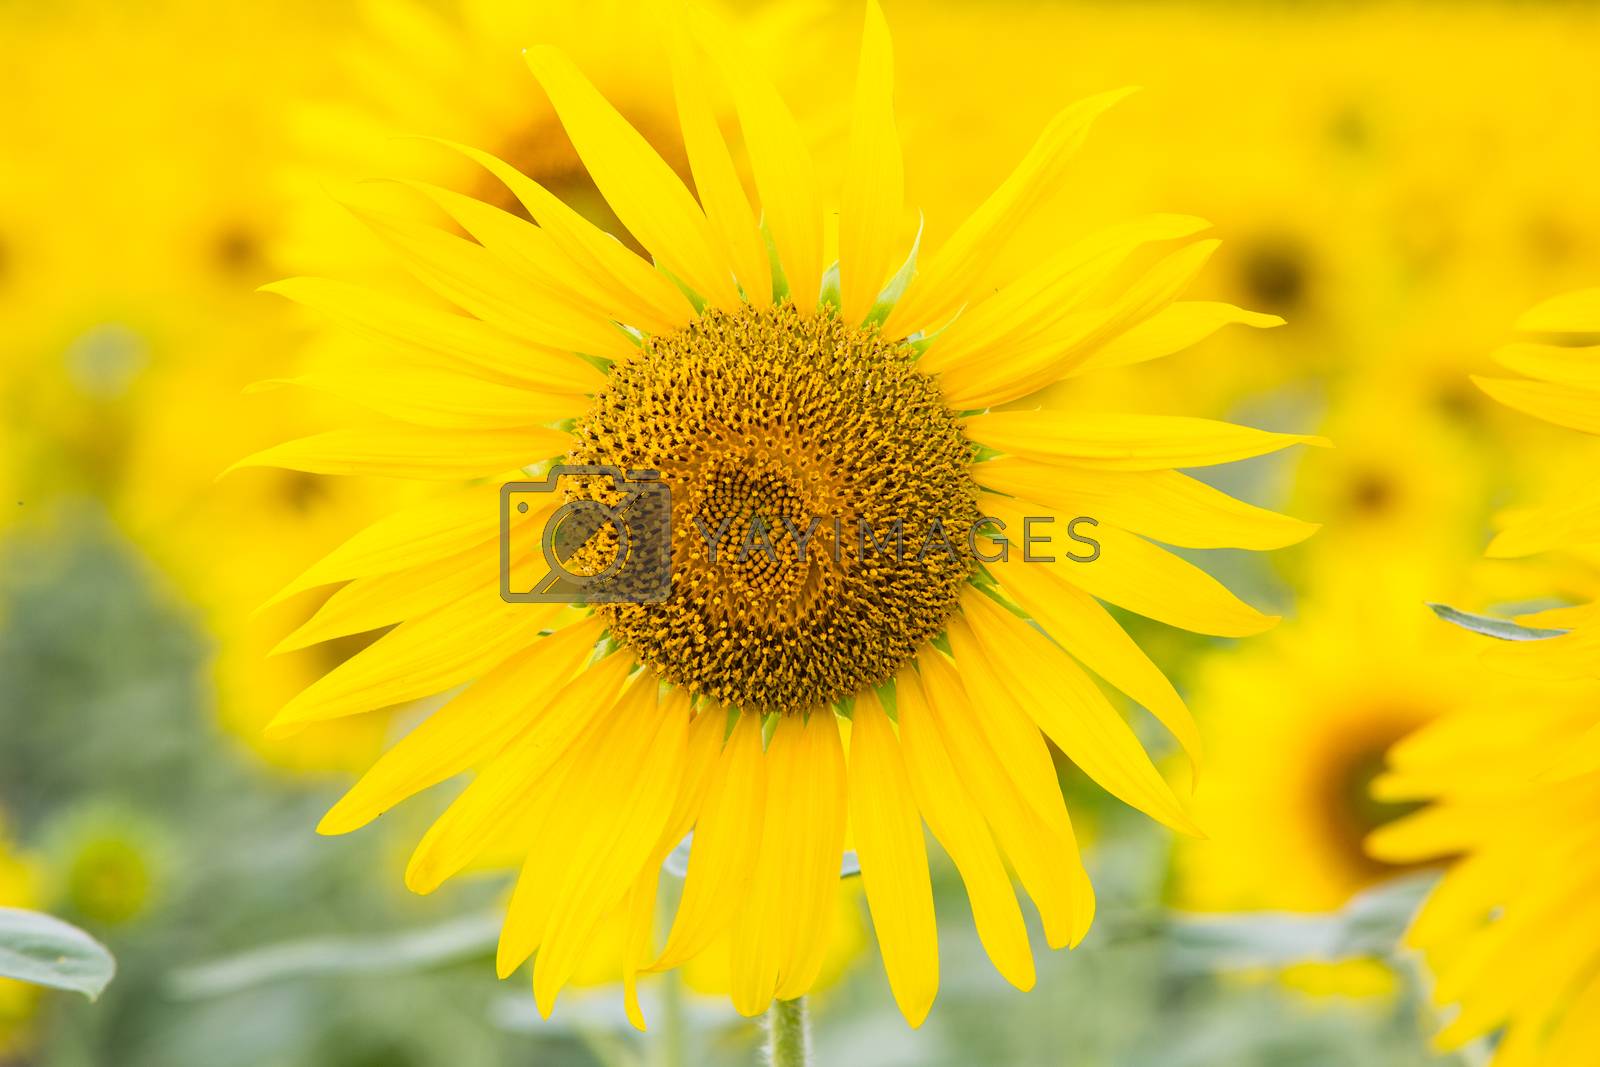 Royalty free image of Sunflower by tuchkay